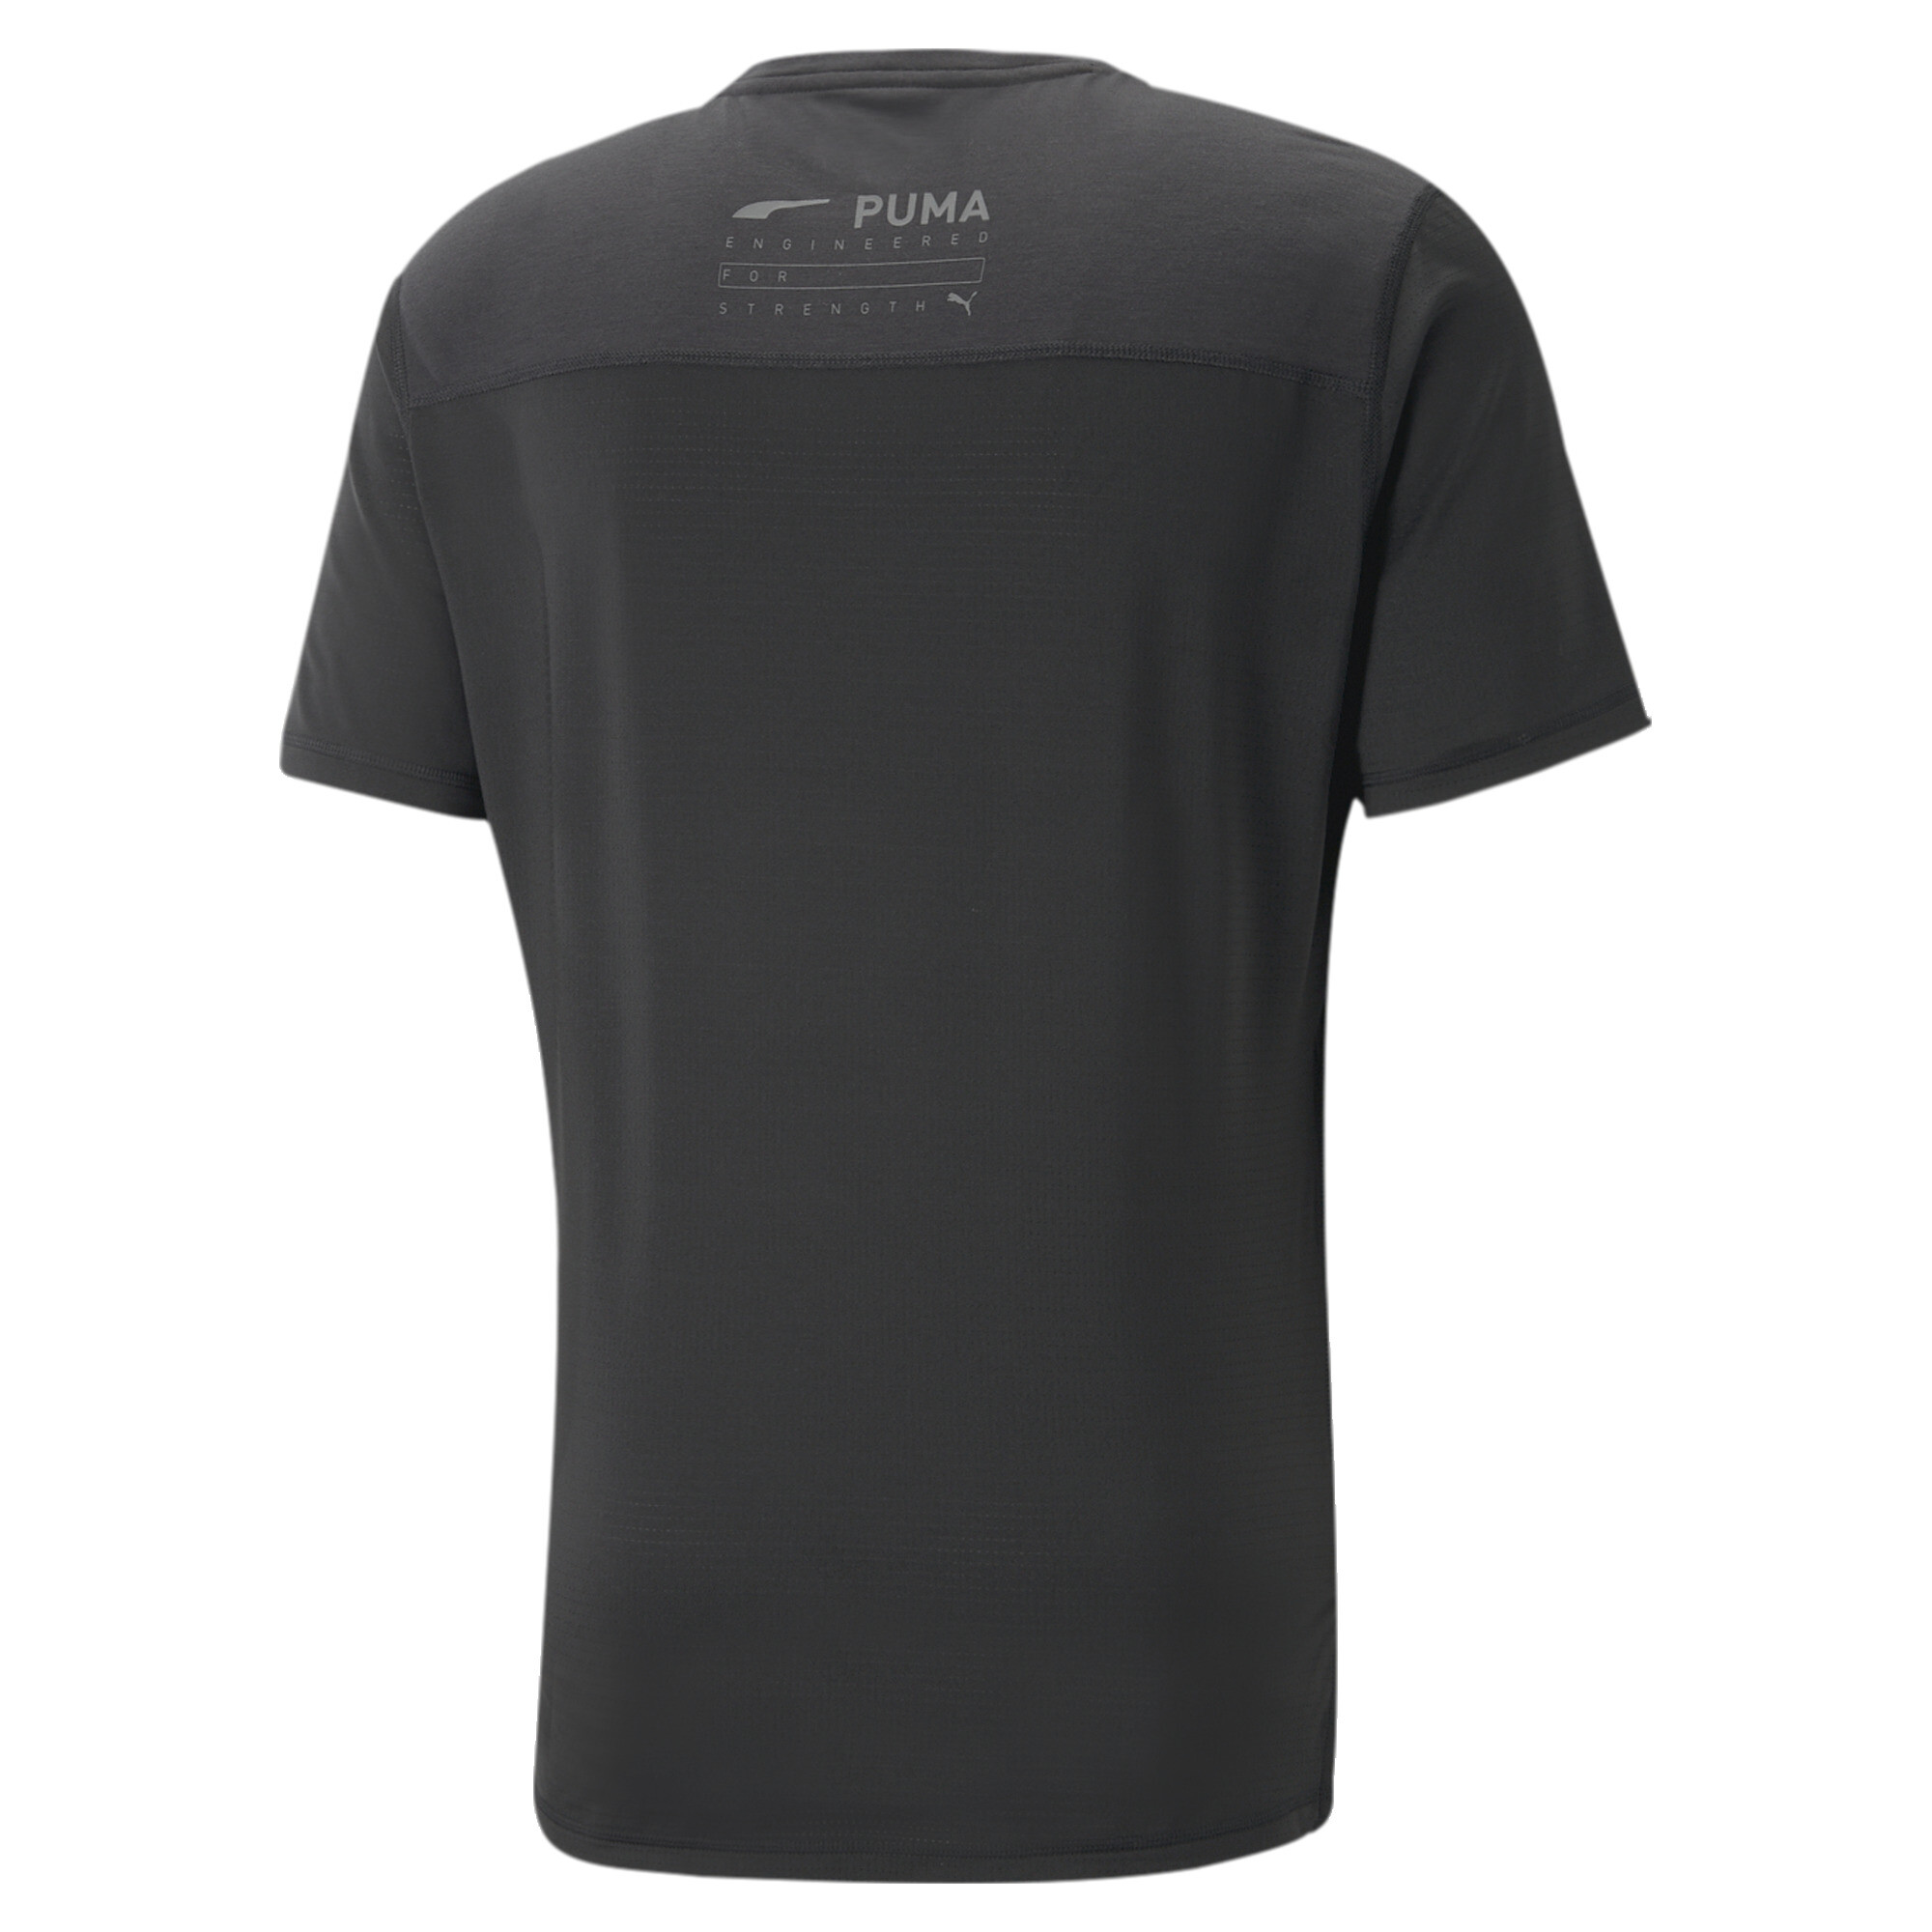 Men's PUMA Engineered For Strength Training T-Shirt Men In 10 - Black, Size Large